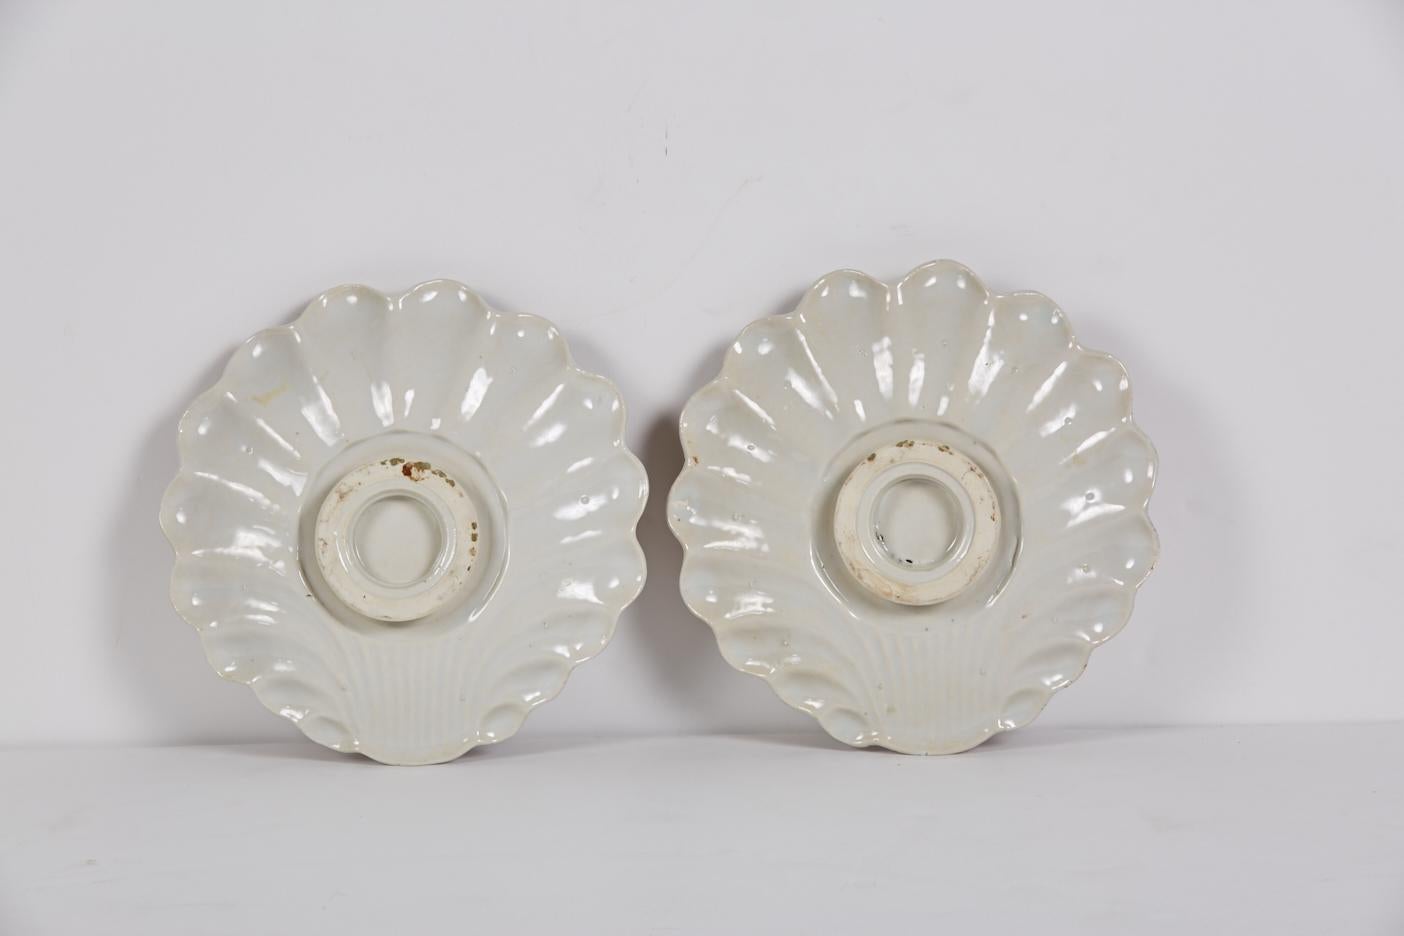 Hand-Painted Pair of 18th Century Chinese Export Porcelain Mancerinas or Trembleuses For Sale